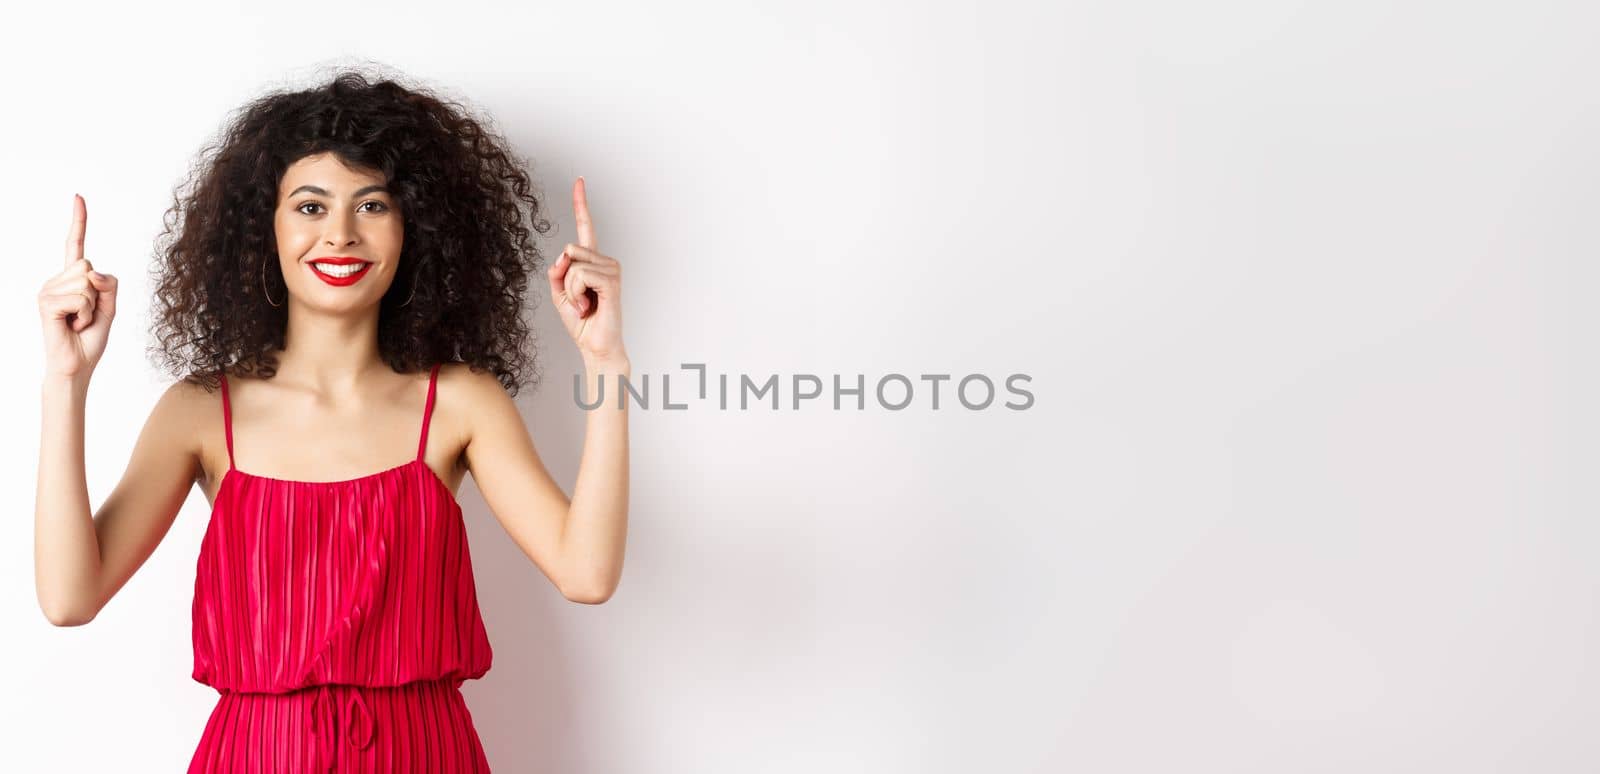 Smiling woman in elegant red dress and makeup, pointing fingers up and showing promo offer on valentines day, standing over white background.